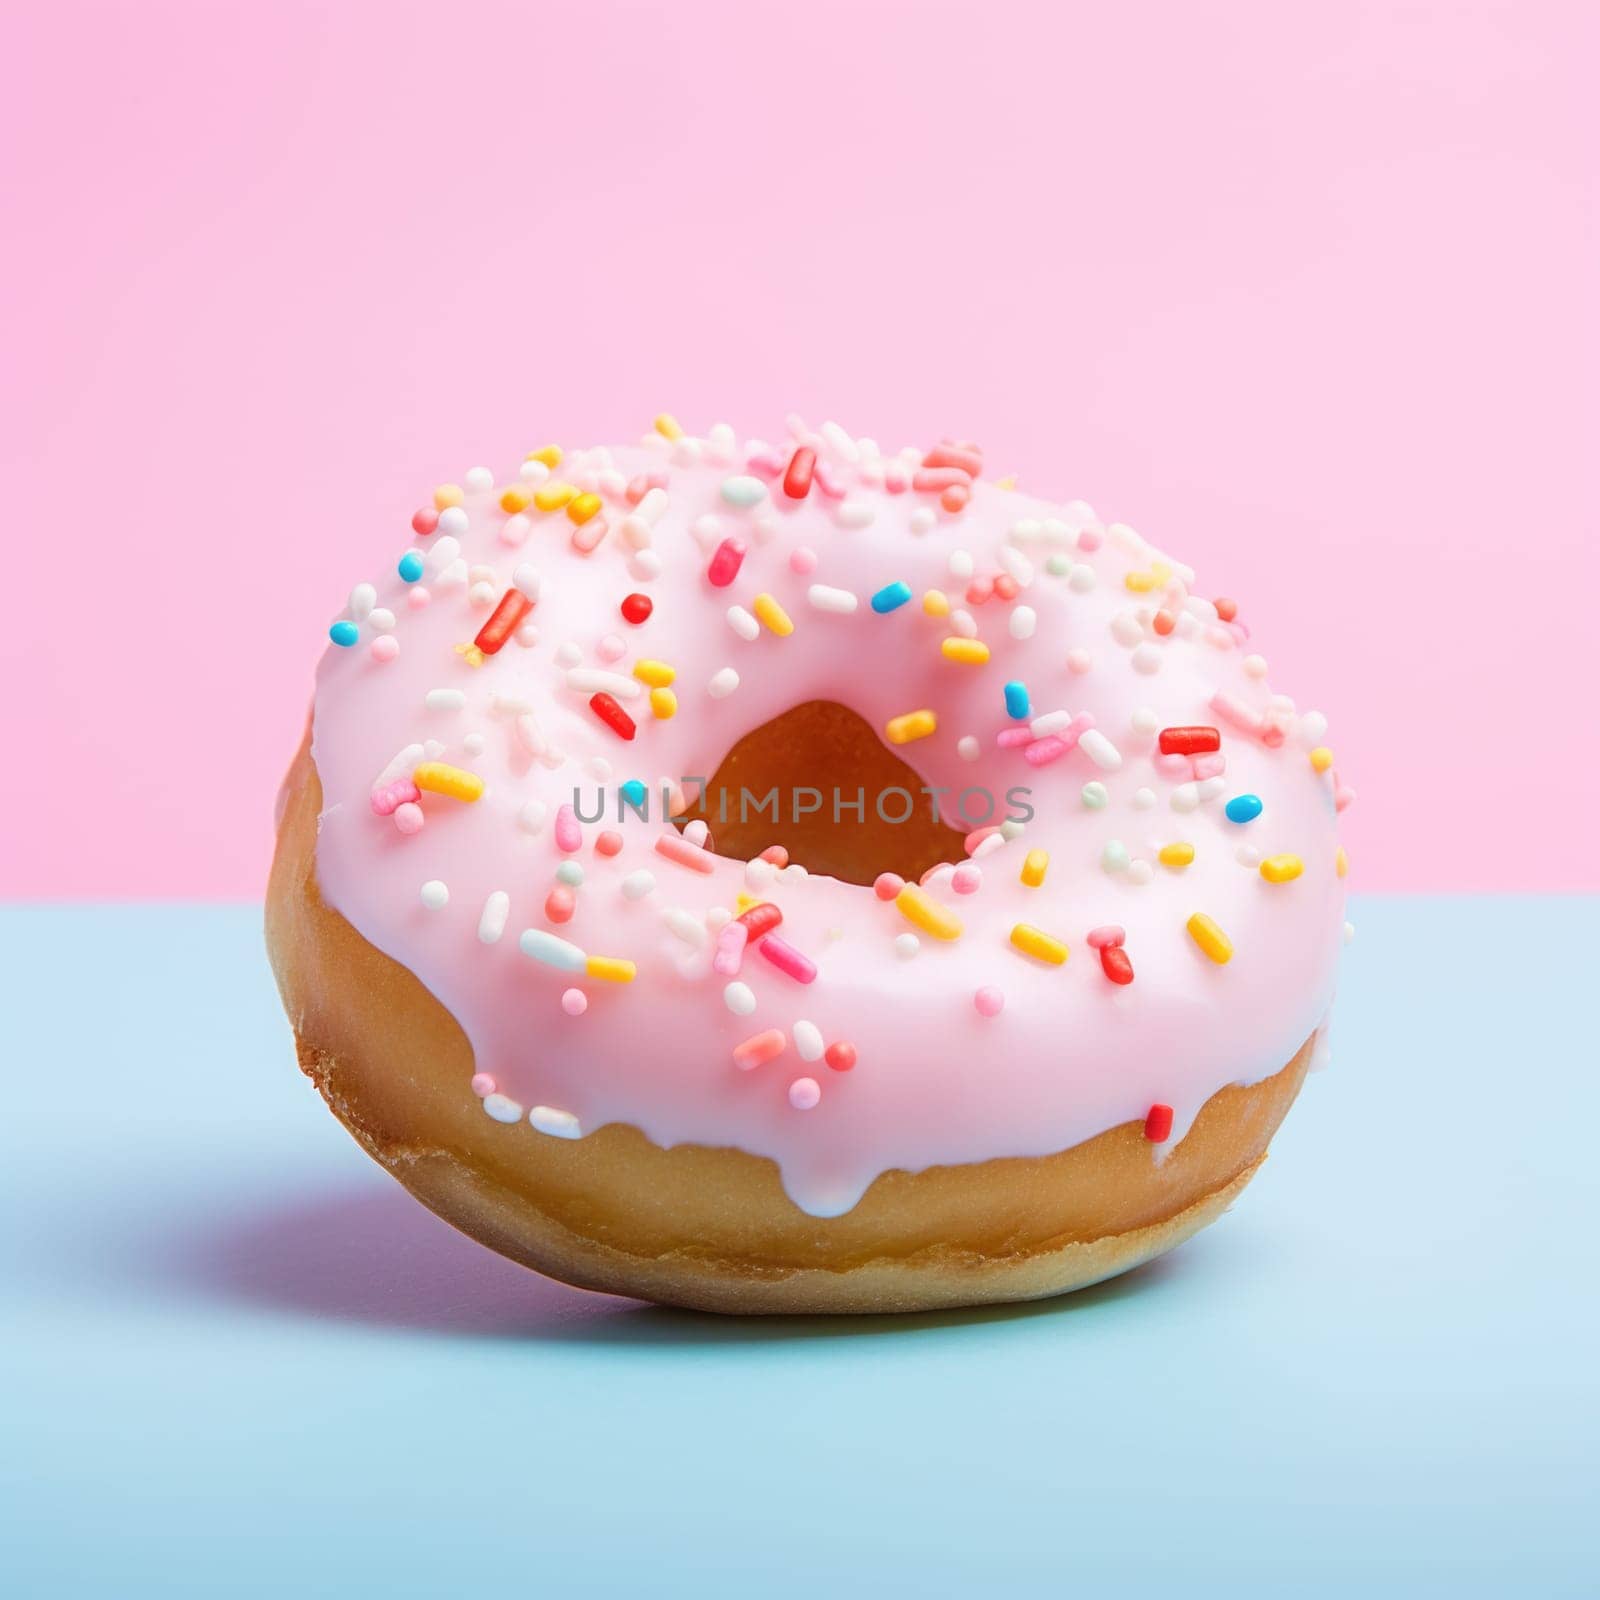 A pink donut with sprinkles on a blue background